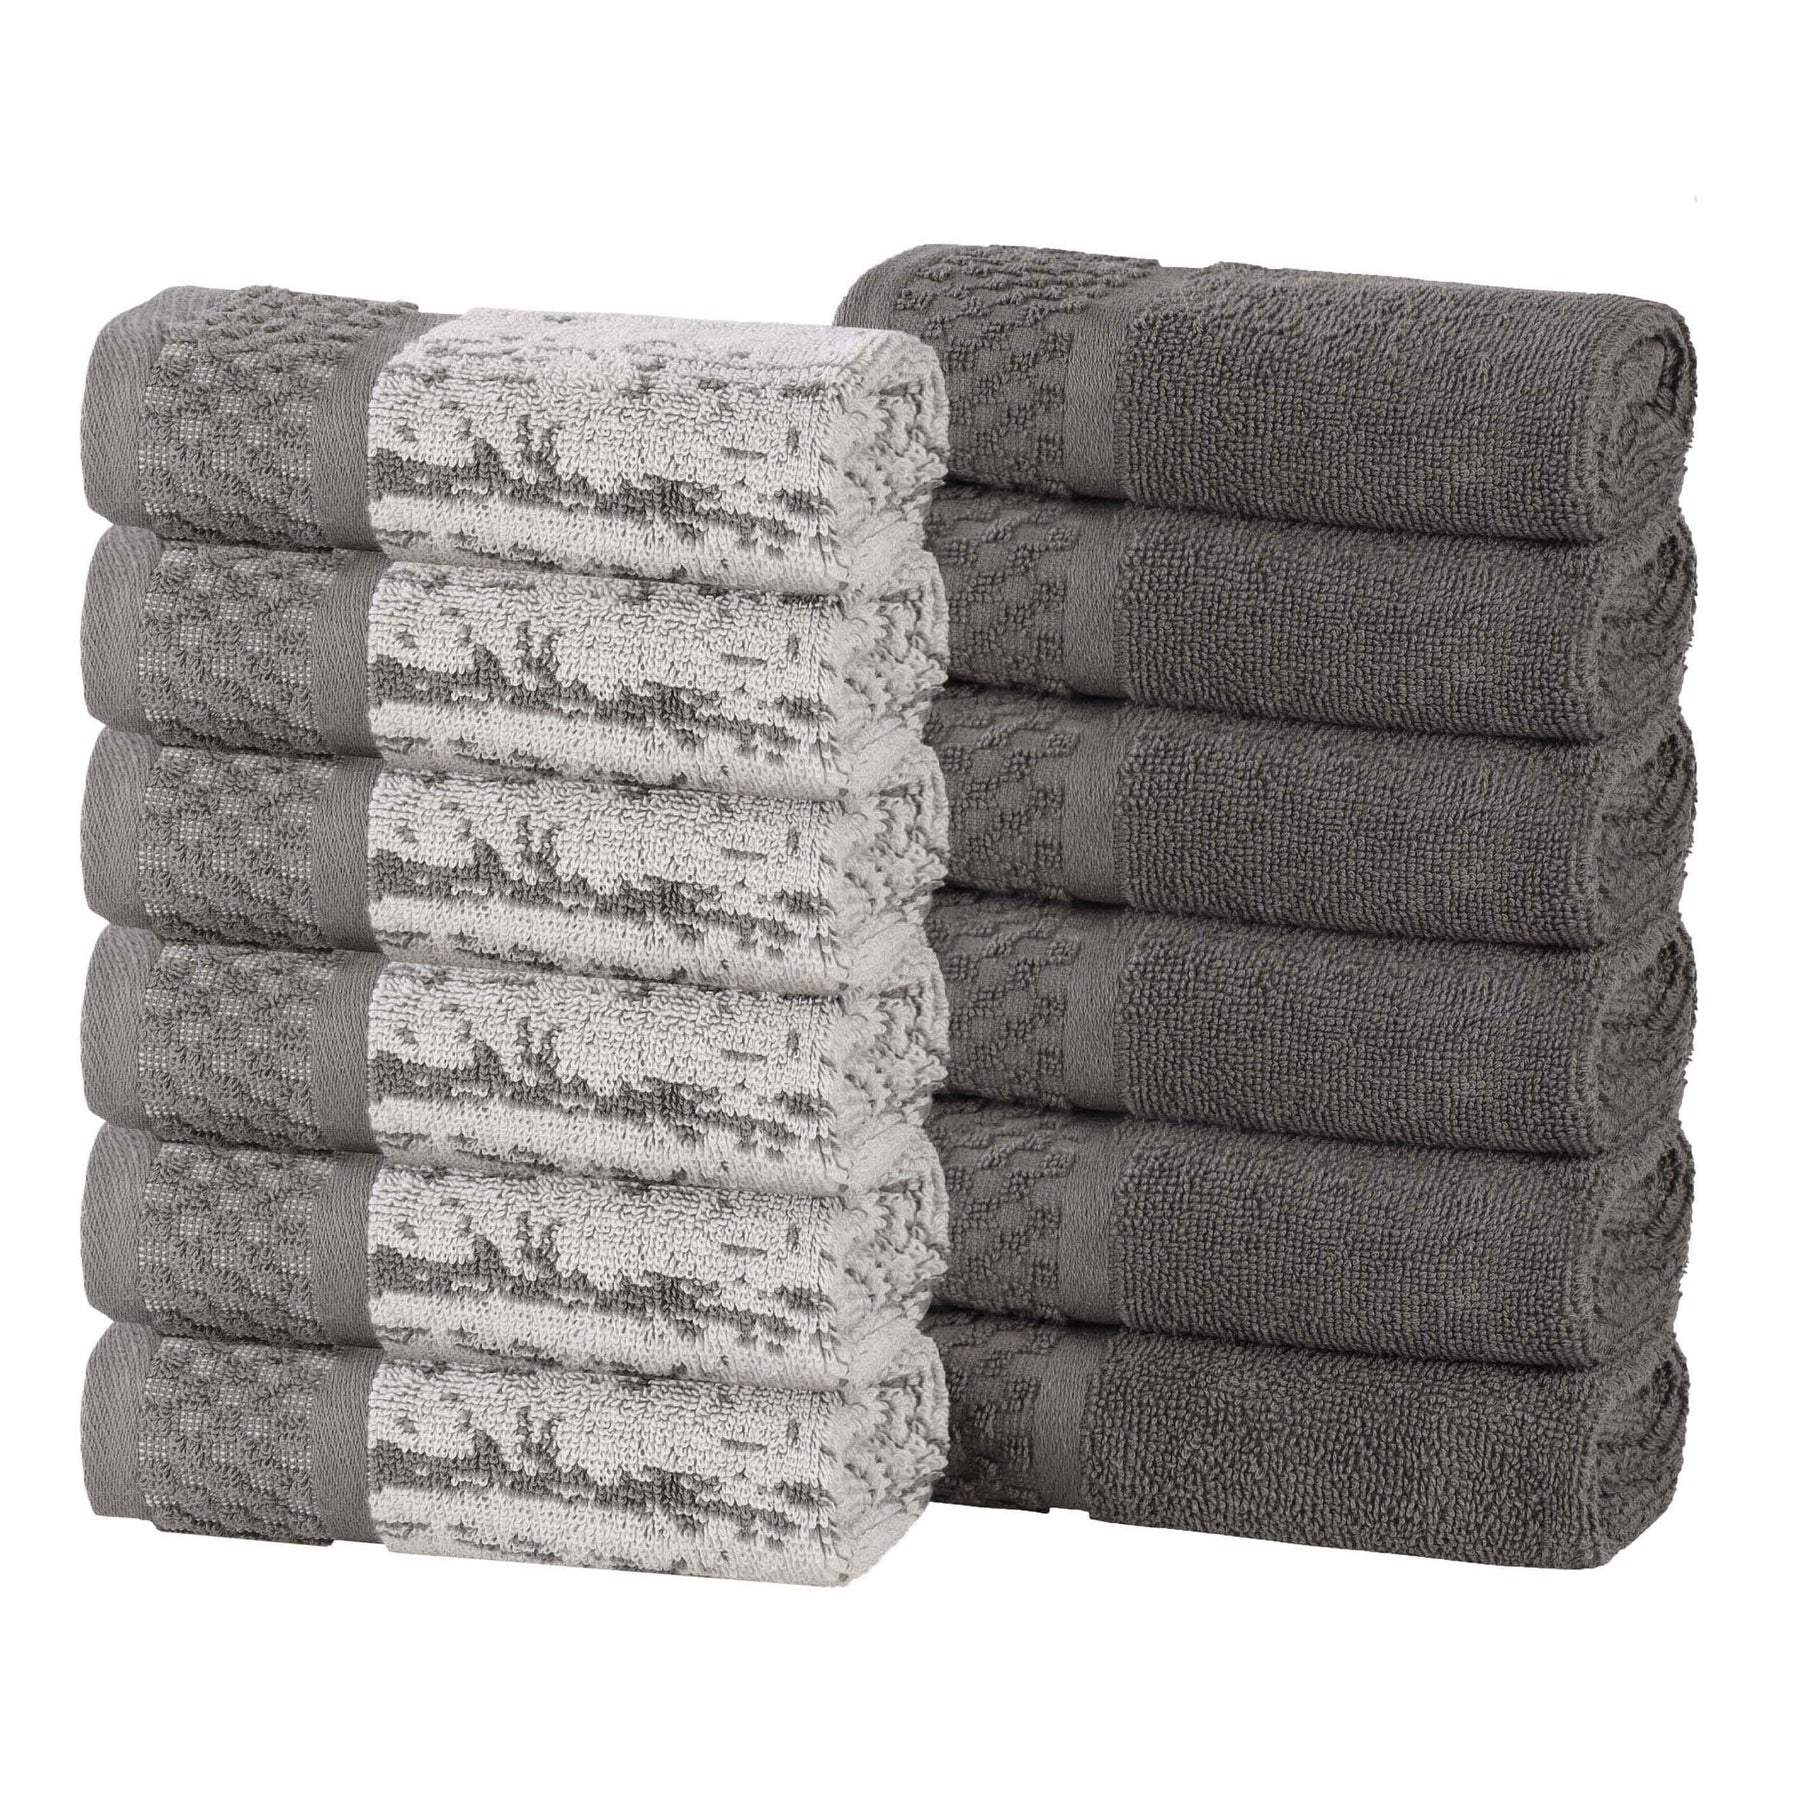 Lodie Cotton Jacquard Solid and Two-Toned Face Towel Washcloth Set of 12 - Charcoal-Ivory